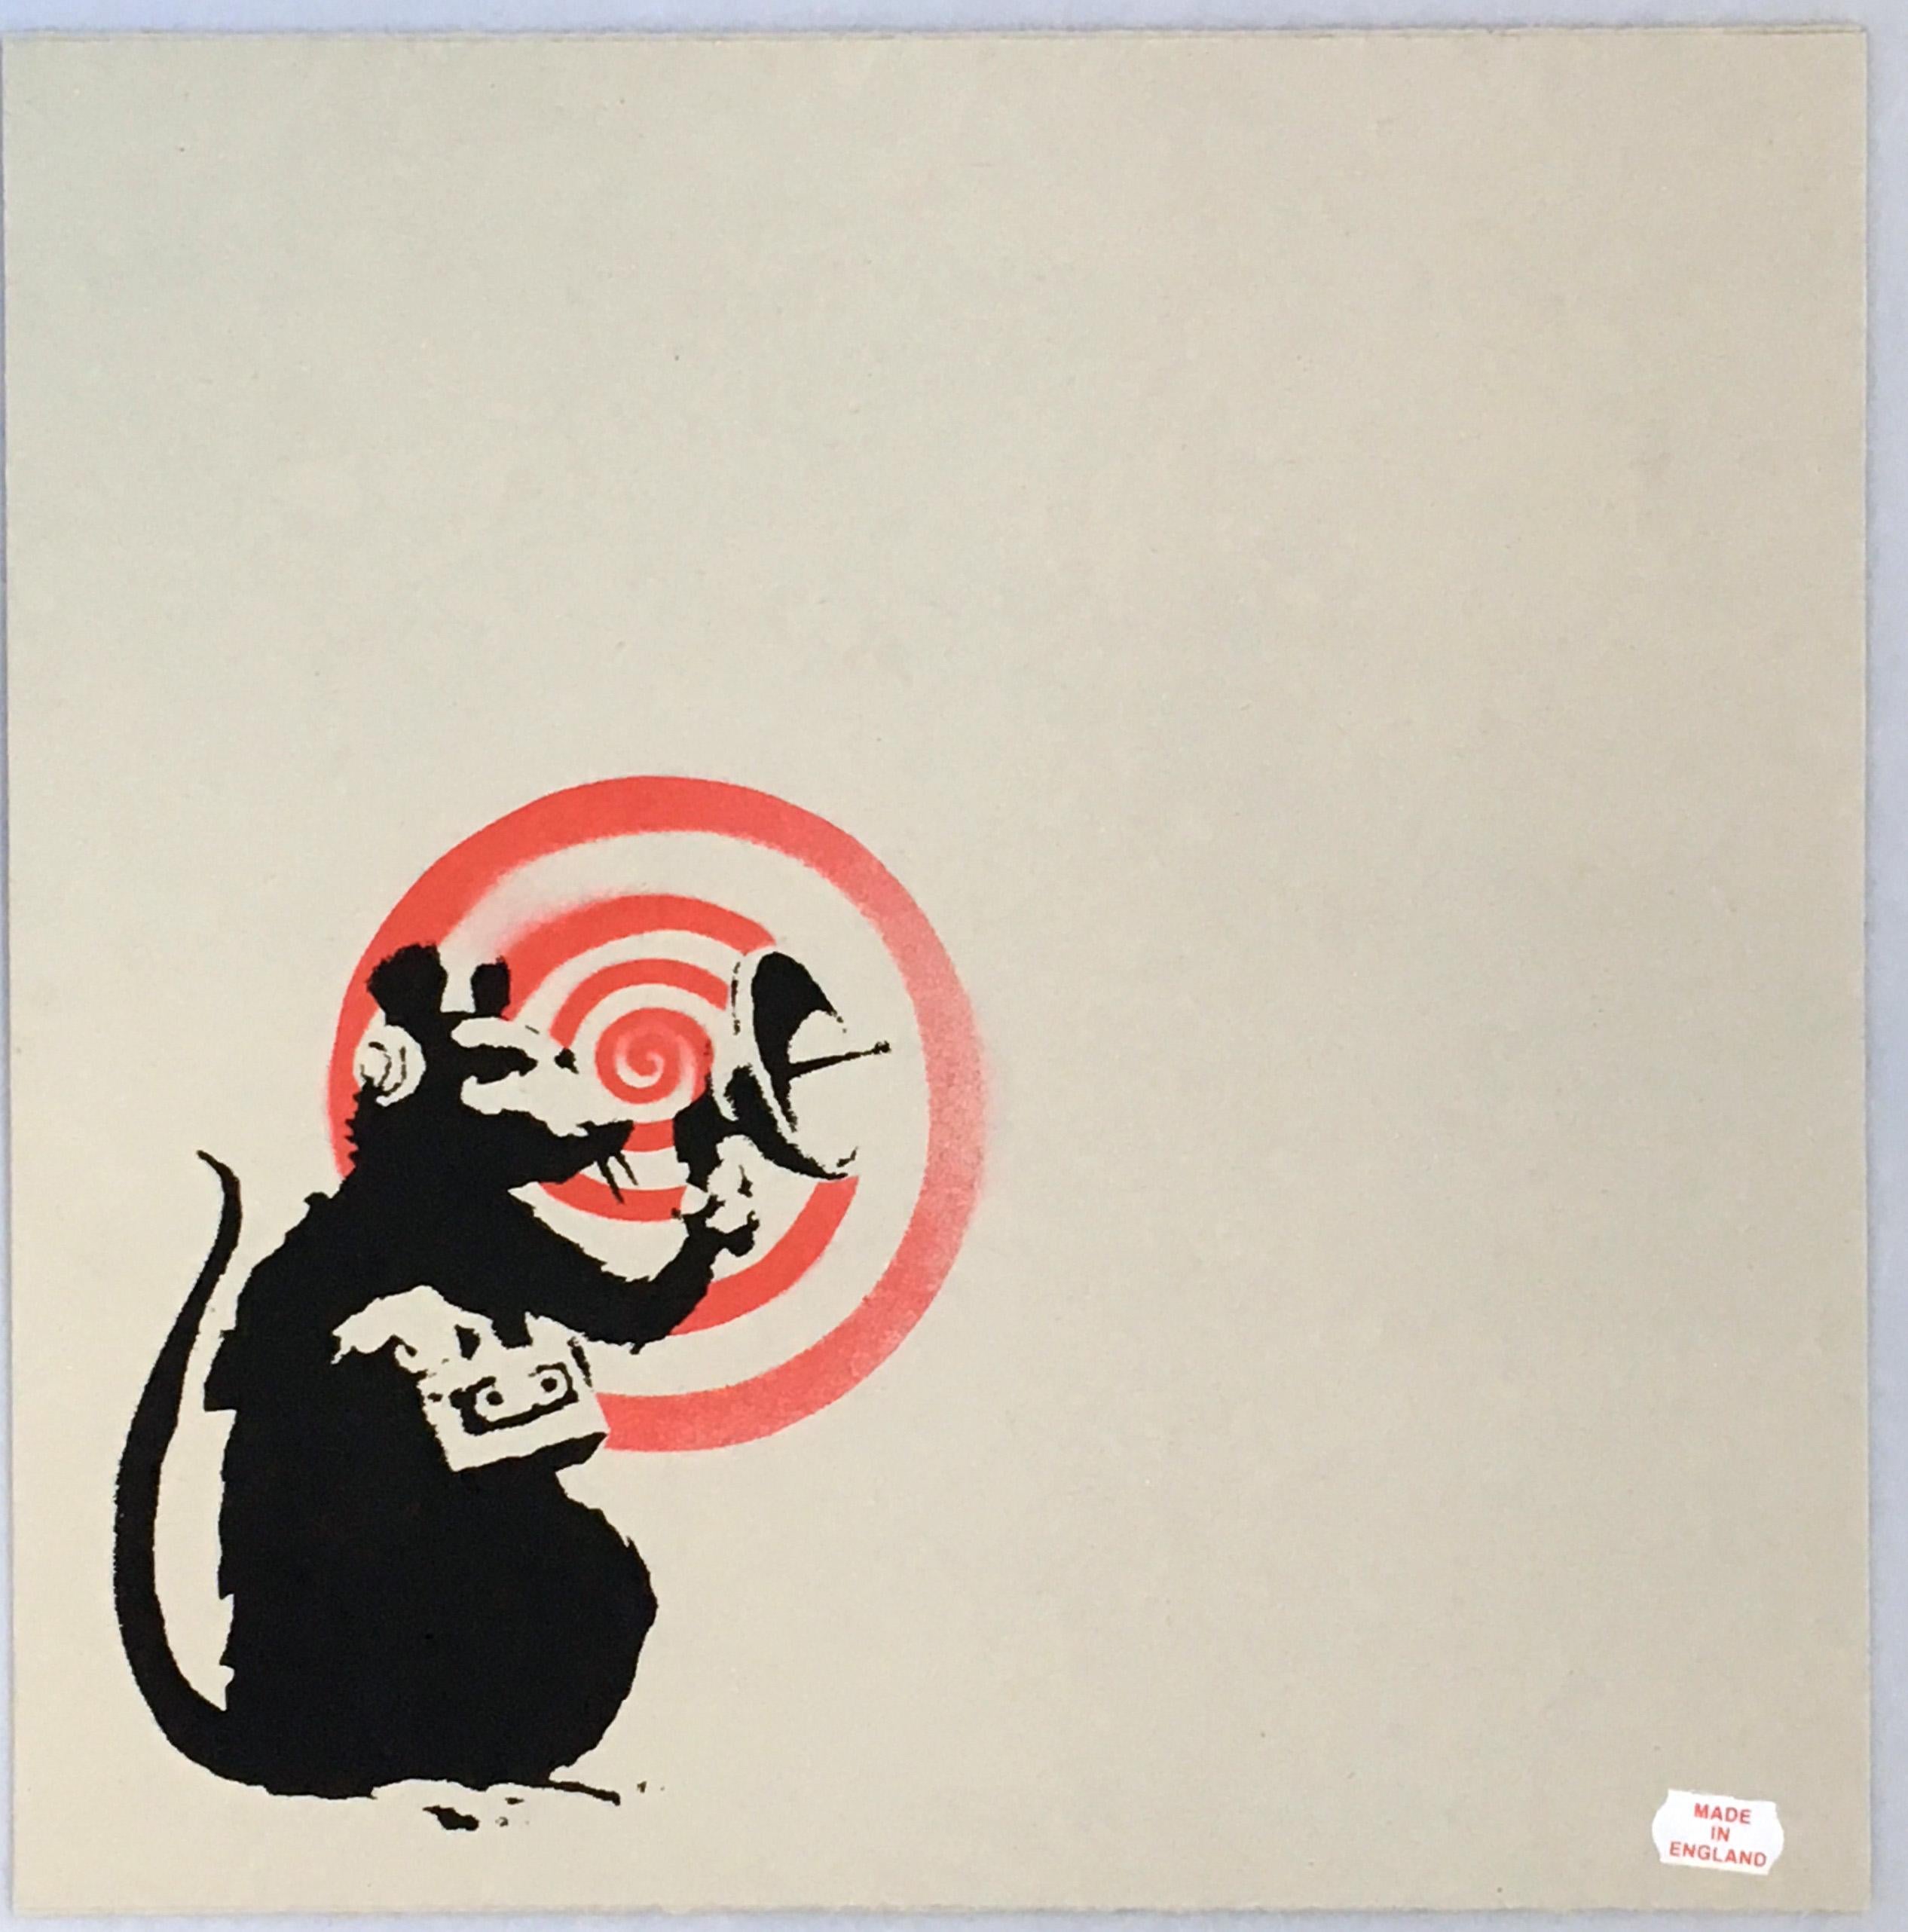 Banksy produced this cover & record label art for his friends Dirty Funker in 2008. Featured here is Banksy's world-renowned Radar Rat

Silkscreen on Record Sleeve and Vinyl Record; 2008
Dimensions: 12 x12 in (30 x 30 cm)
Cover: Excellent condition